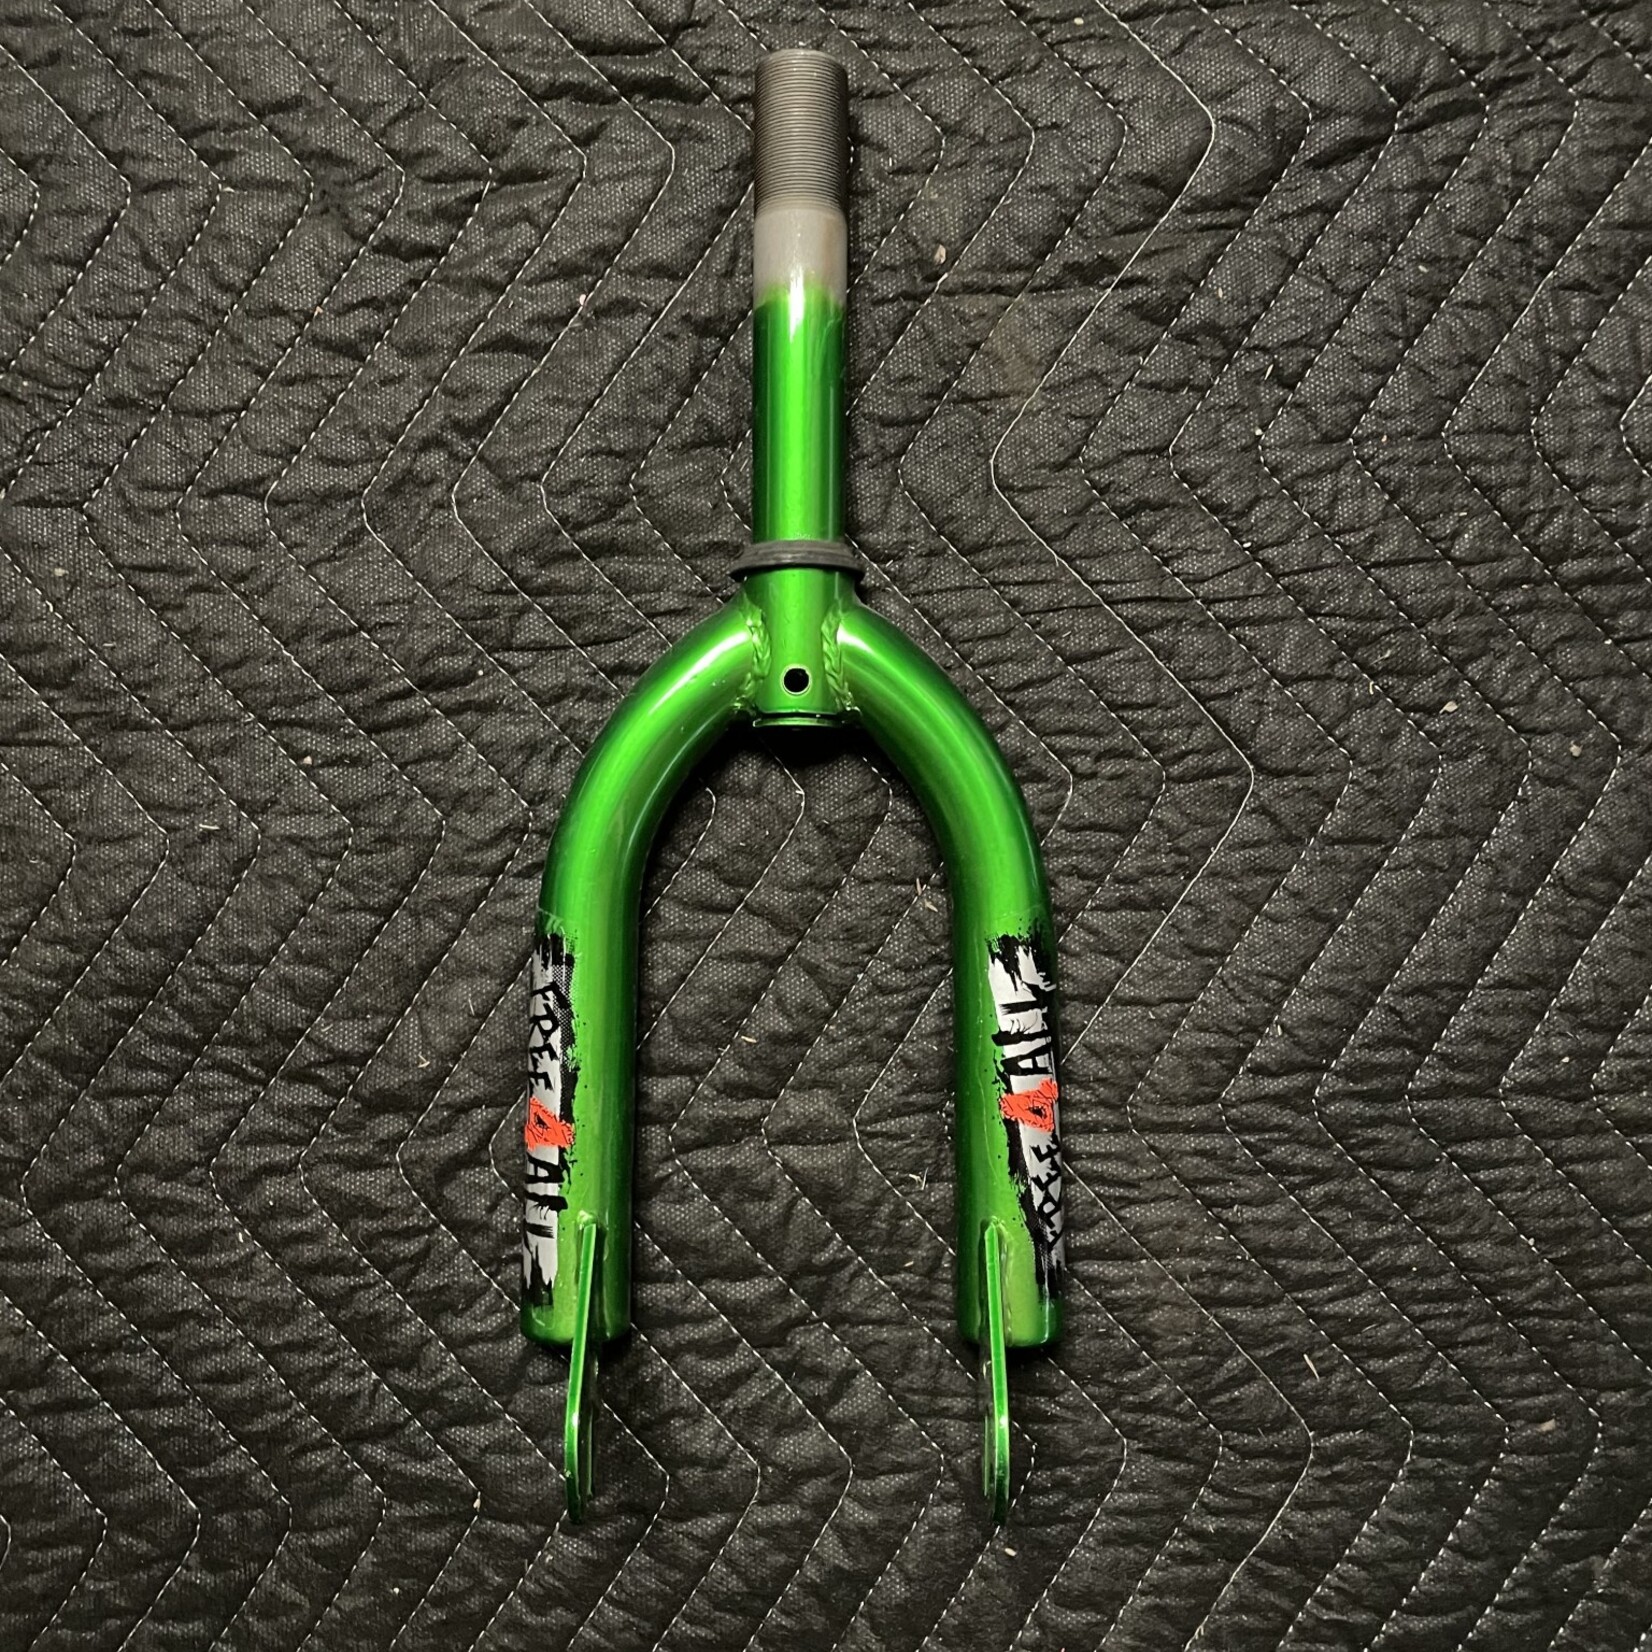 Kent Free 4 All 12” Children’s Bicycle Fork 5” Steer Tube (Green)